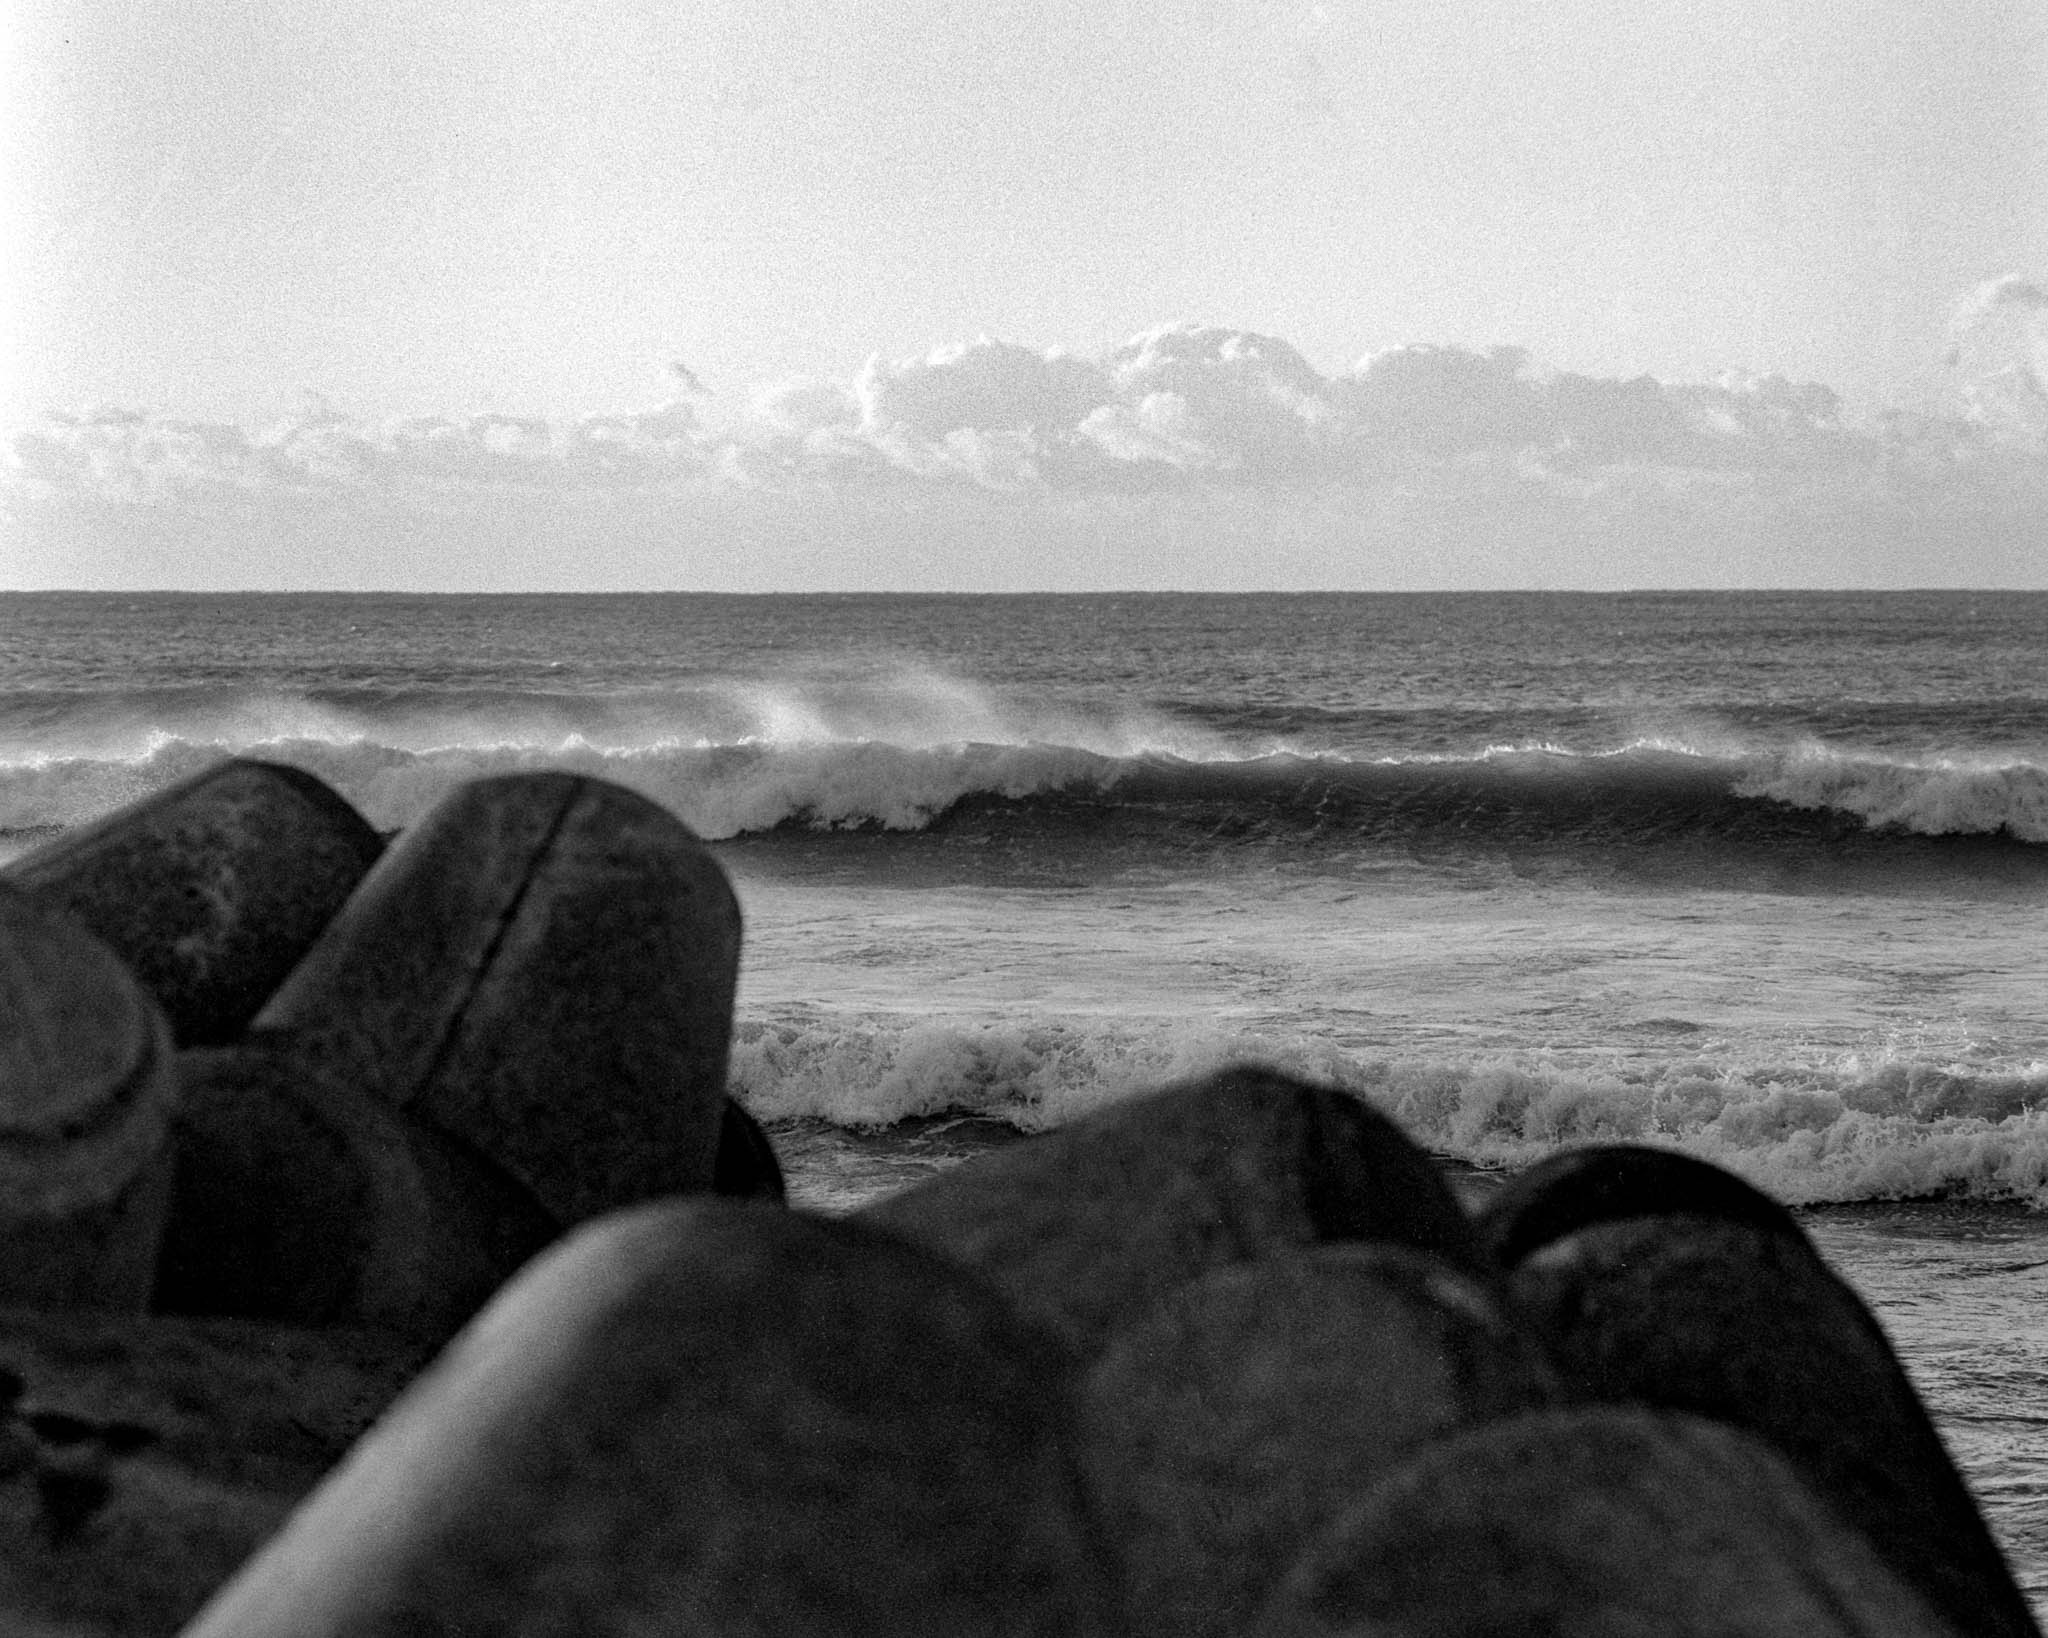 Monochrome photograph of a serene coastline featuring eroded boulders, dynamic ocean waves, and dramatic clouds.